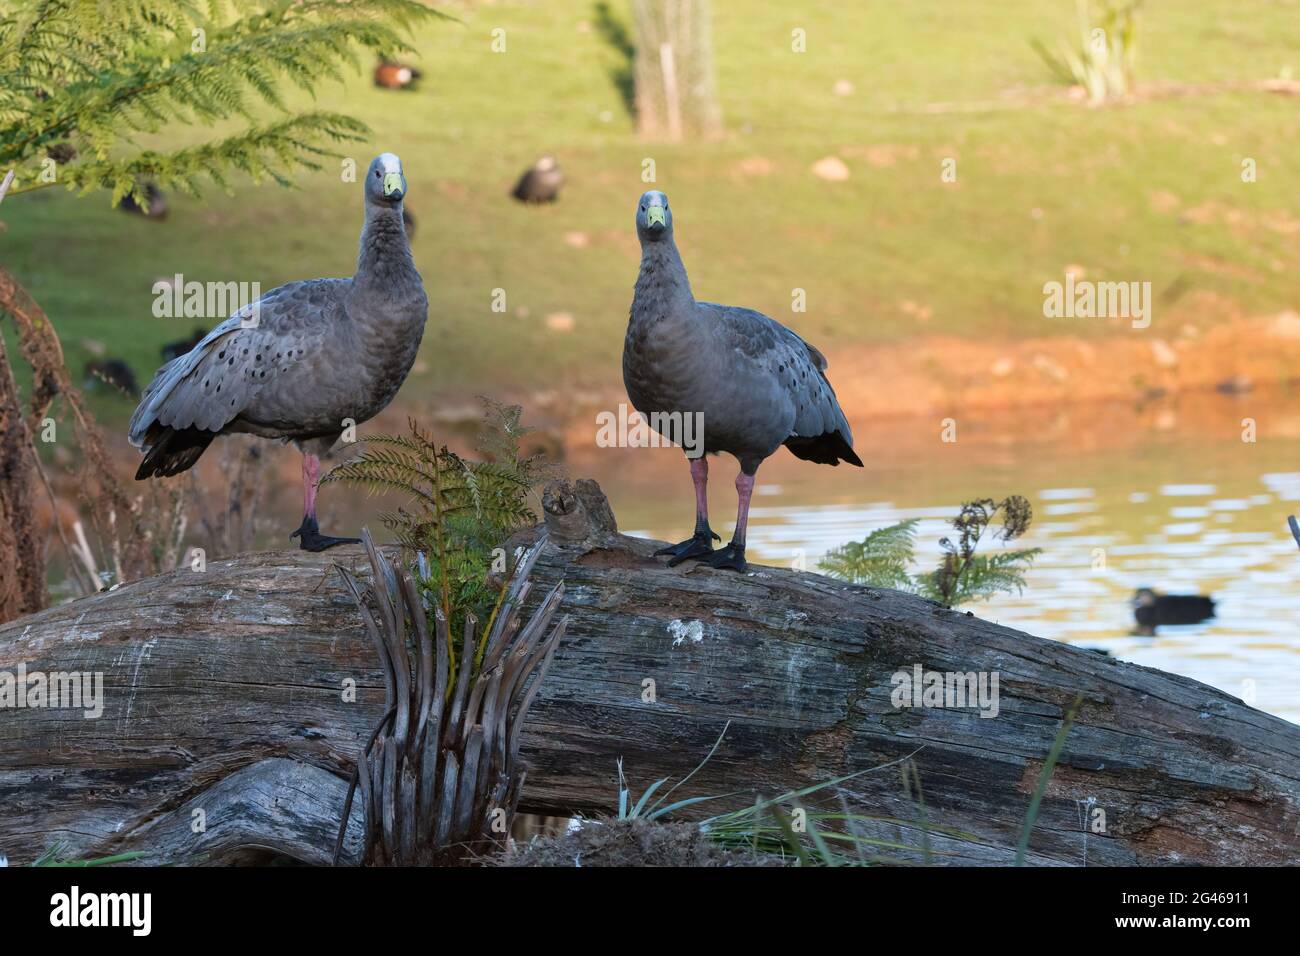 A mating pair of Cape Barren geese standing on a log near a waterhole in a grassy field in Tasmania, Australia. Stock Photo